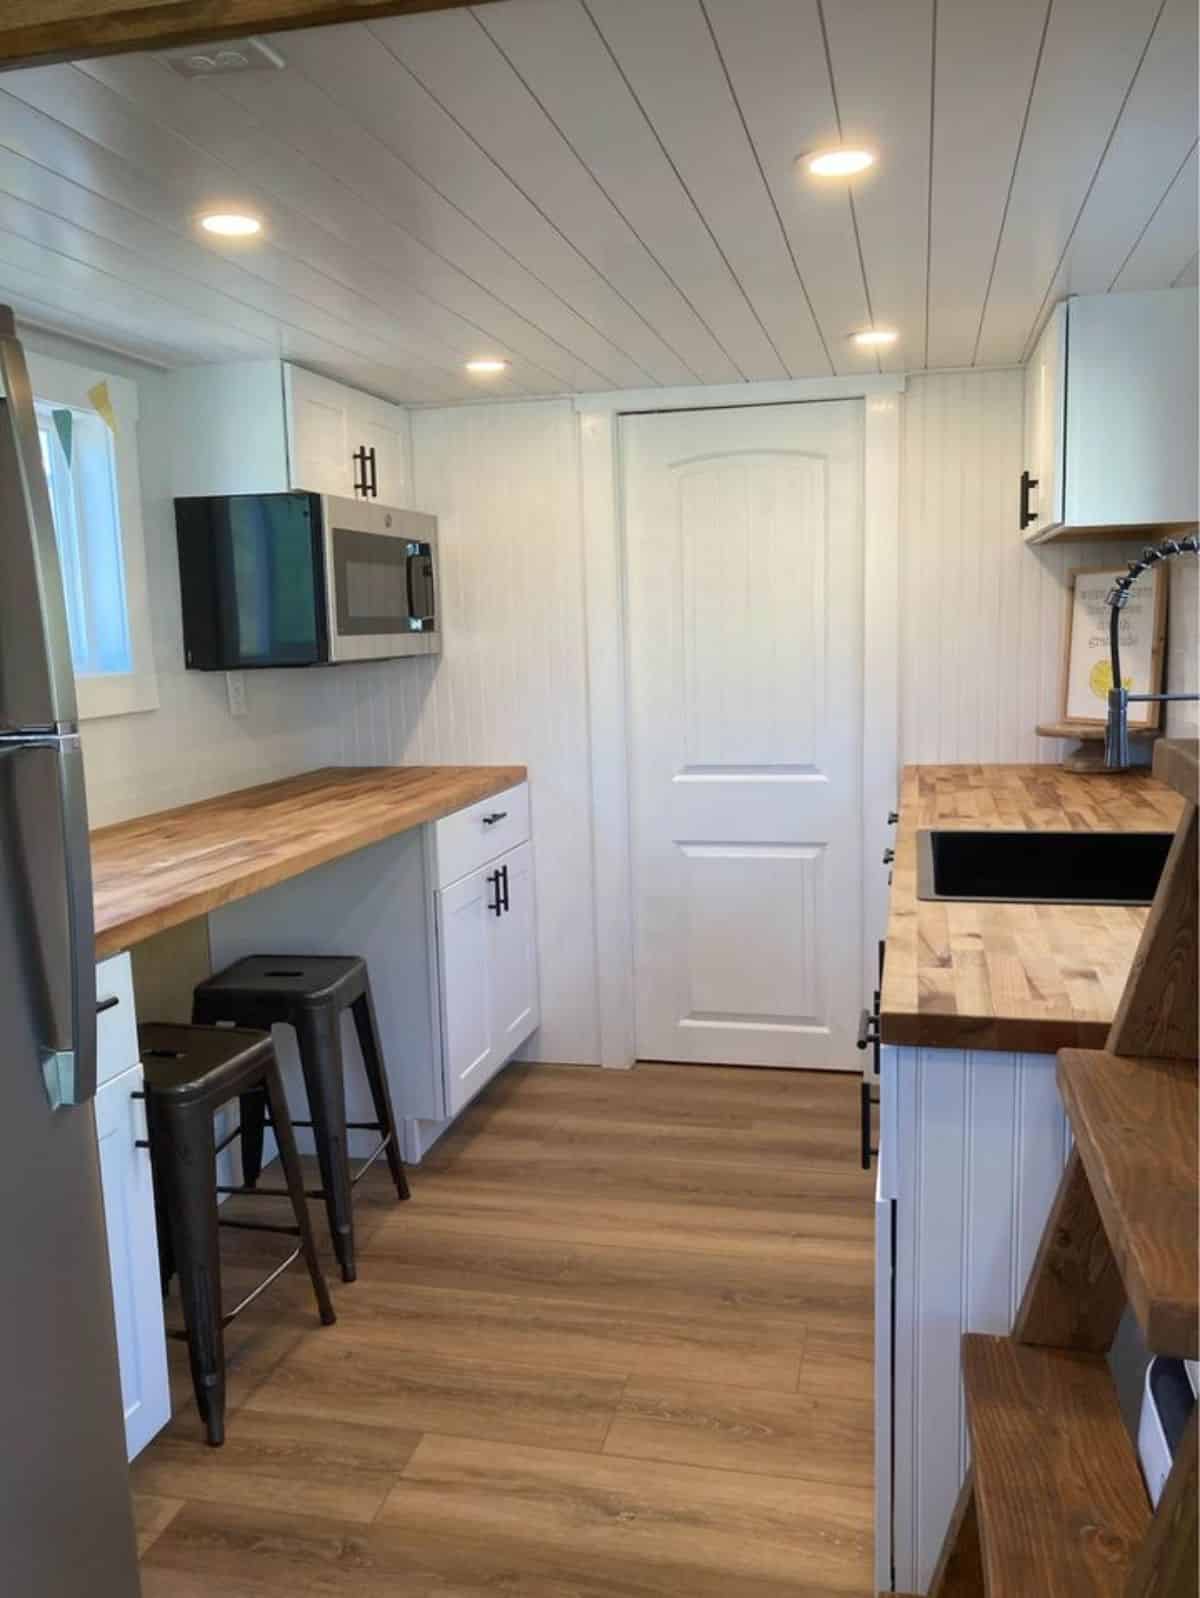 double galley kitchen area with storage cabinets